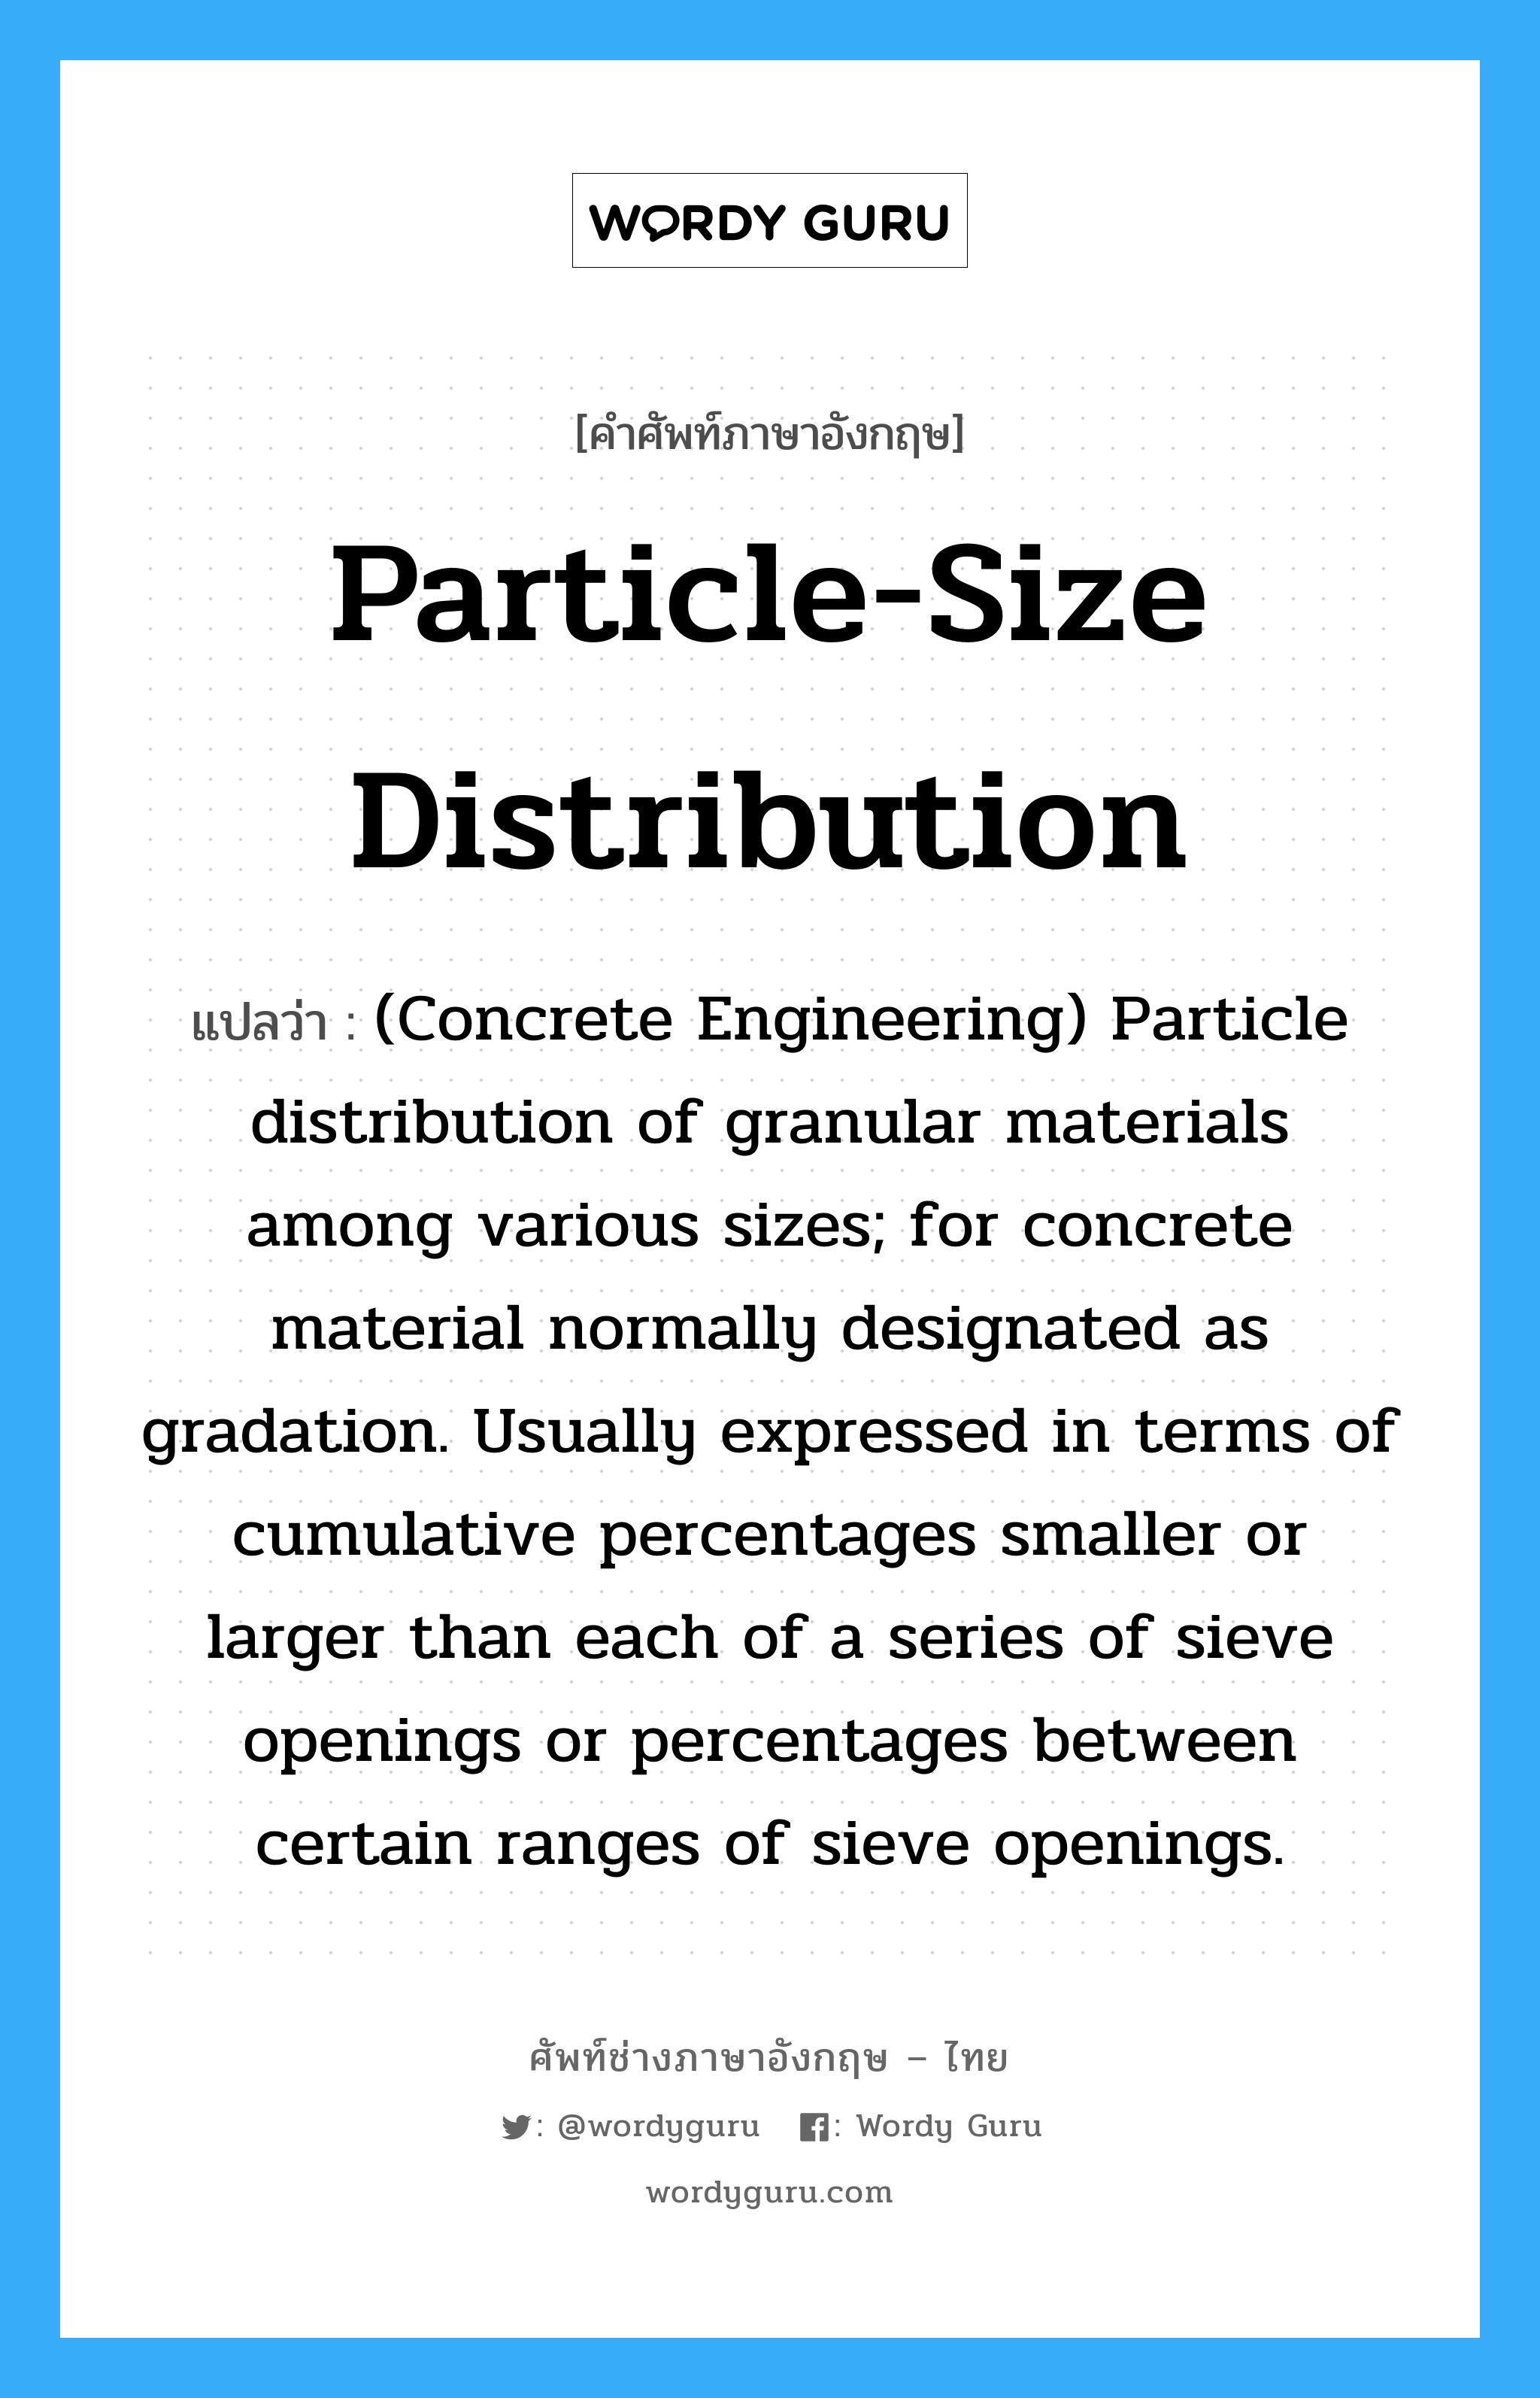 Particle-Size Distribution แปลว่า?, คำศัพท์ช่างภาษาอังกฤษ - ไทย Particle-Size Distribution คำศัพท์ภาษาอังกฤษ Particle-Size Distribution แปลว่า (Concrete Engineering) Particle distribution of granular materials among various sizes; for concrete material normally designated as gradation. Usually expressed in terms of cumulative percentages smaller or larger than each of a series of sieve openings or percentages between certain ranges of sieve openings.